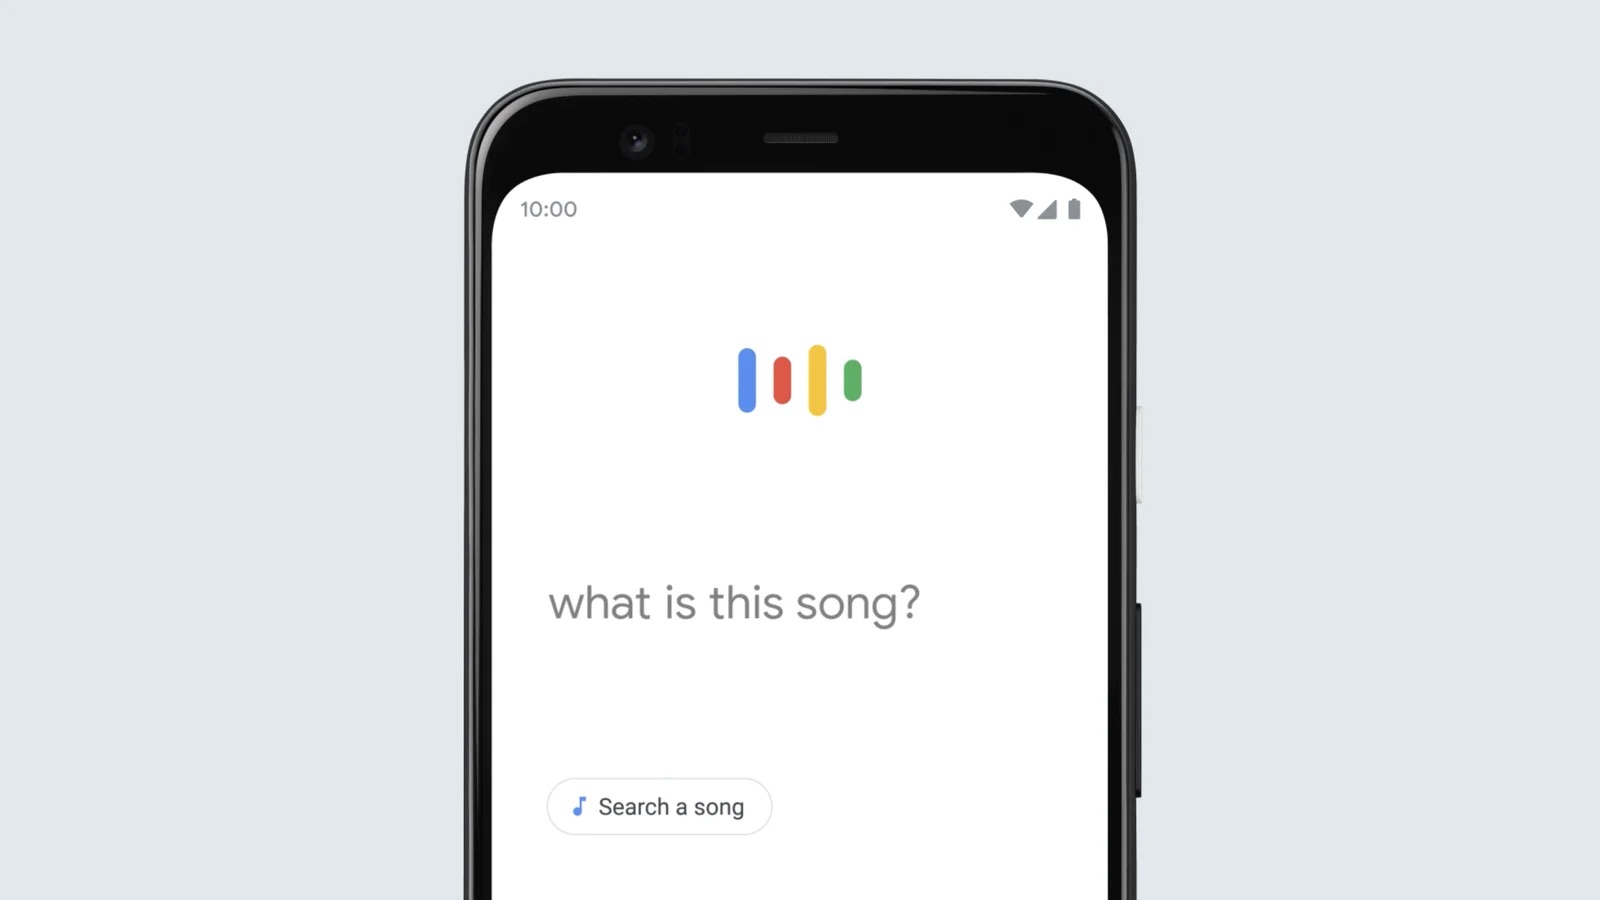 Google also offers a feature inside its own app